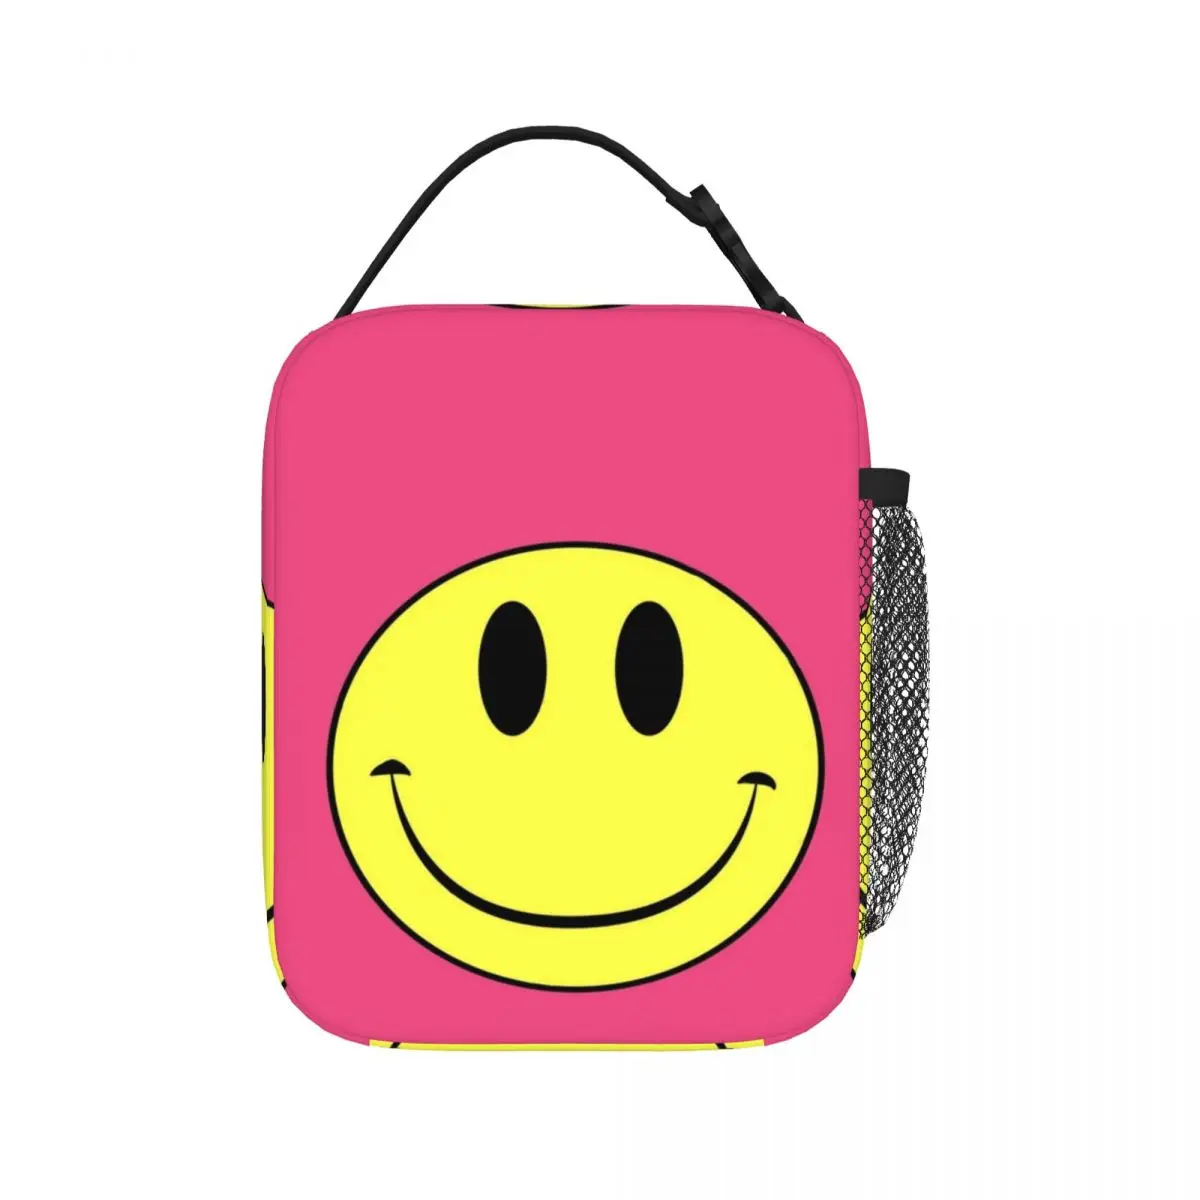 

Sour House Smiley Insulated Lunch Bags Resuable Picnic Bags Thermal Cooler Lunch Box Lunch Tote for Woman Work Children School